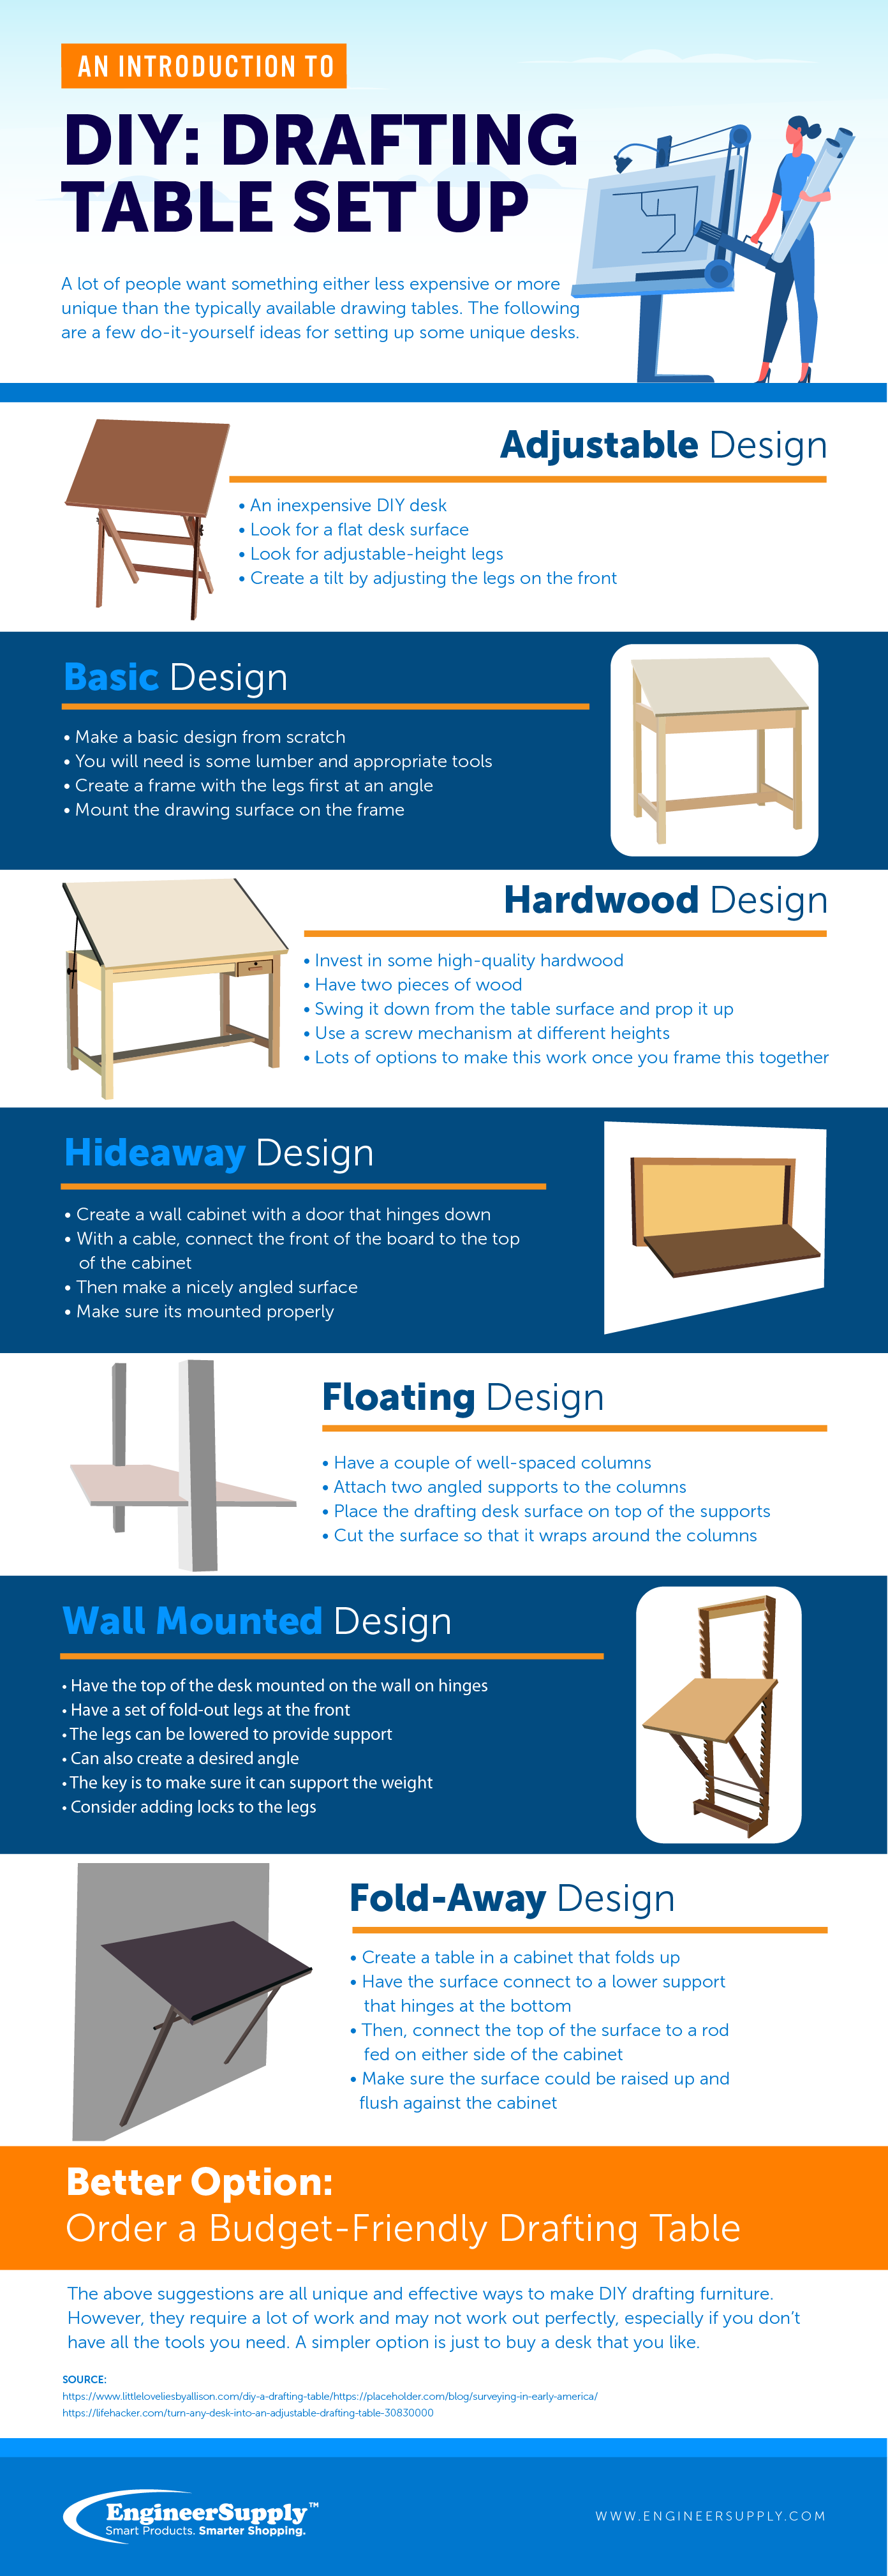 DIY Drafting Table Set Up infographic